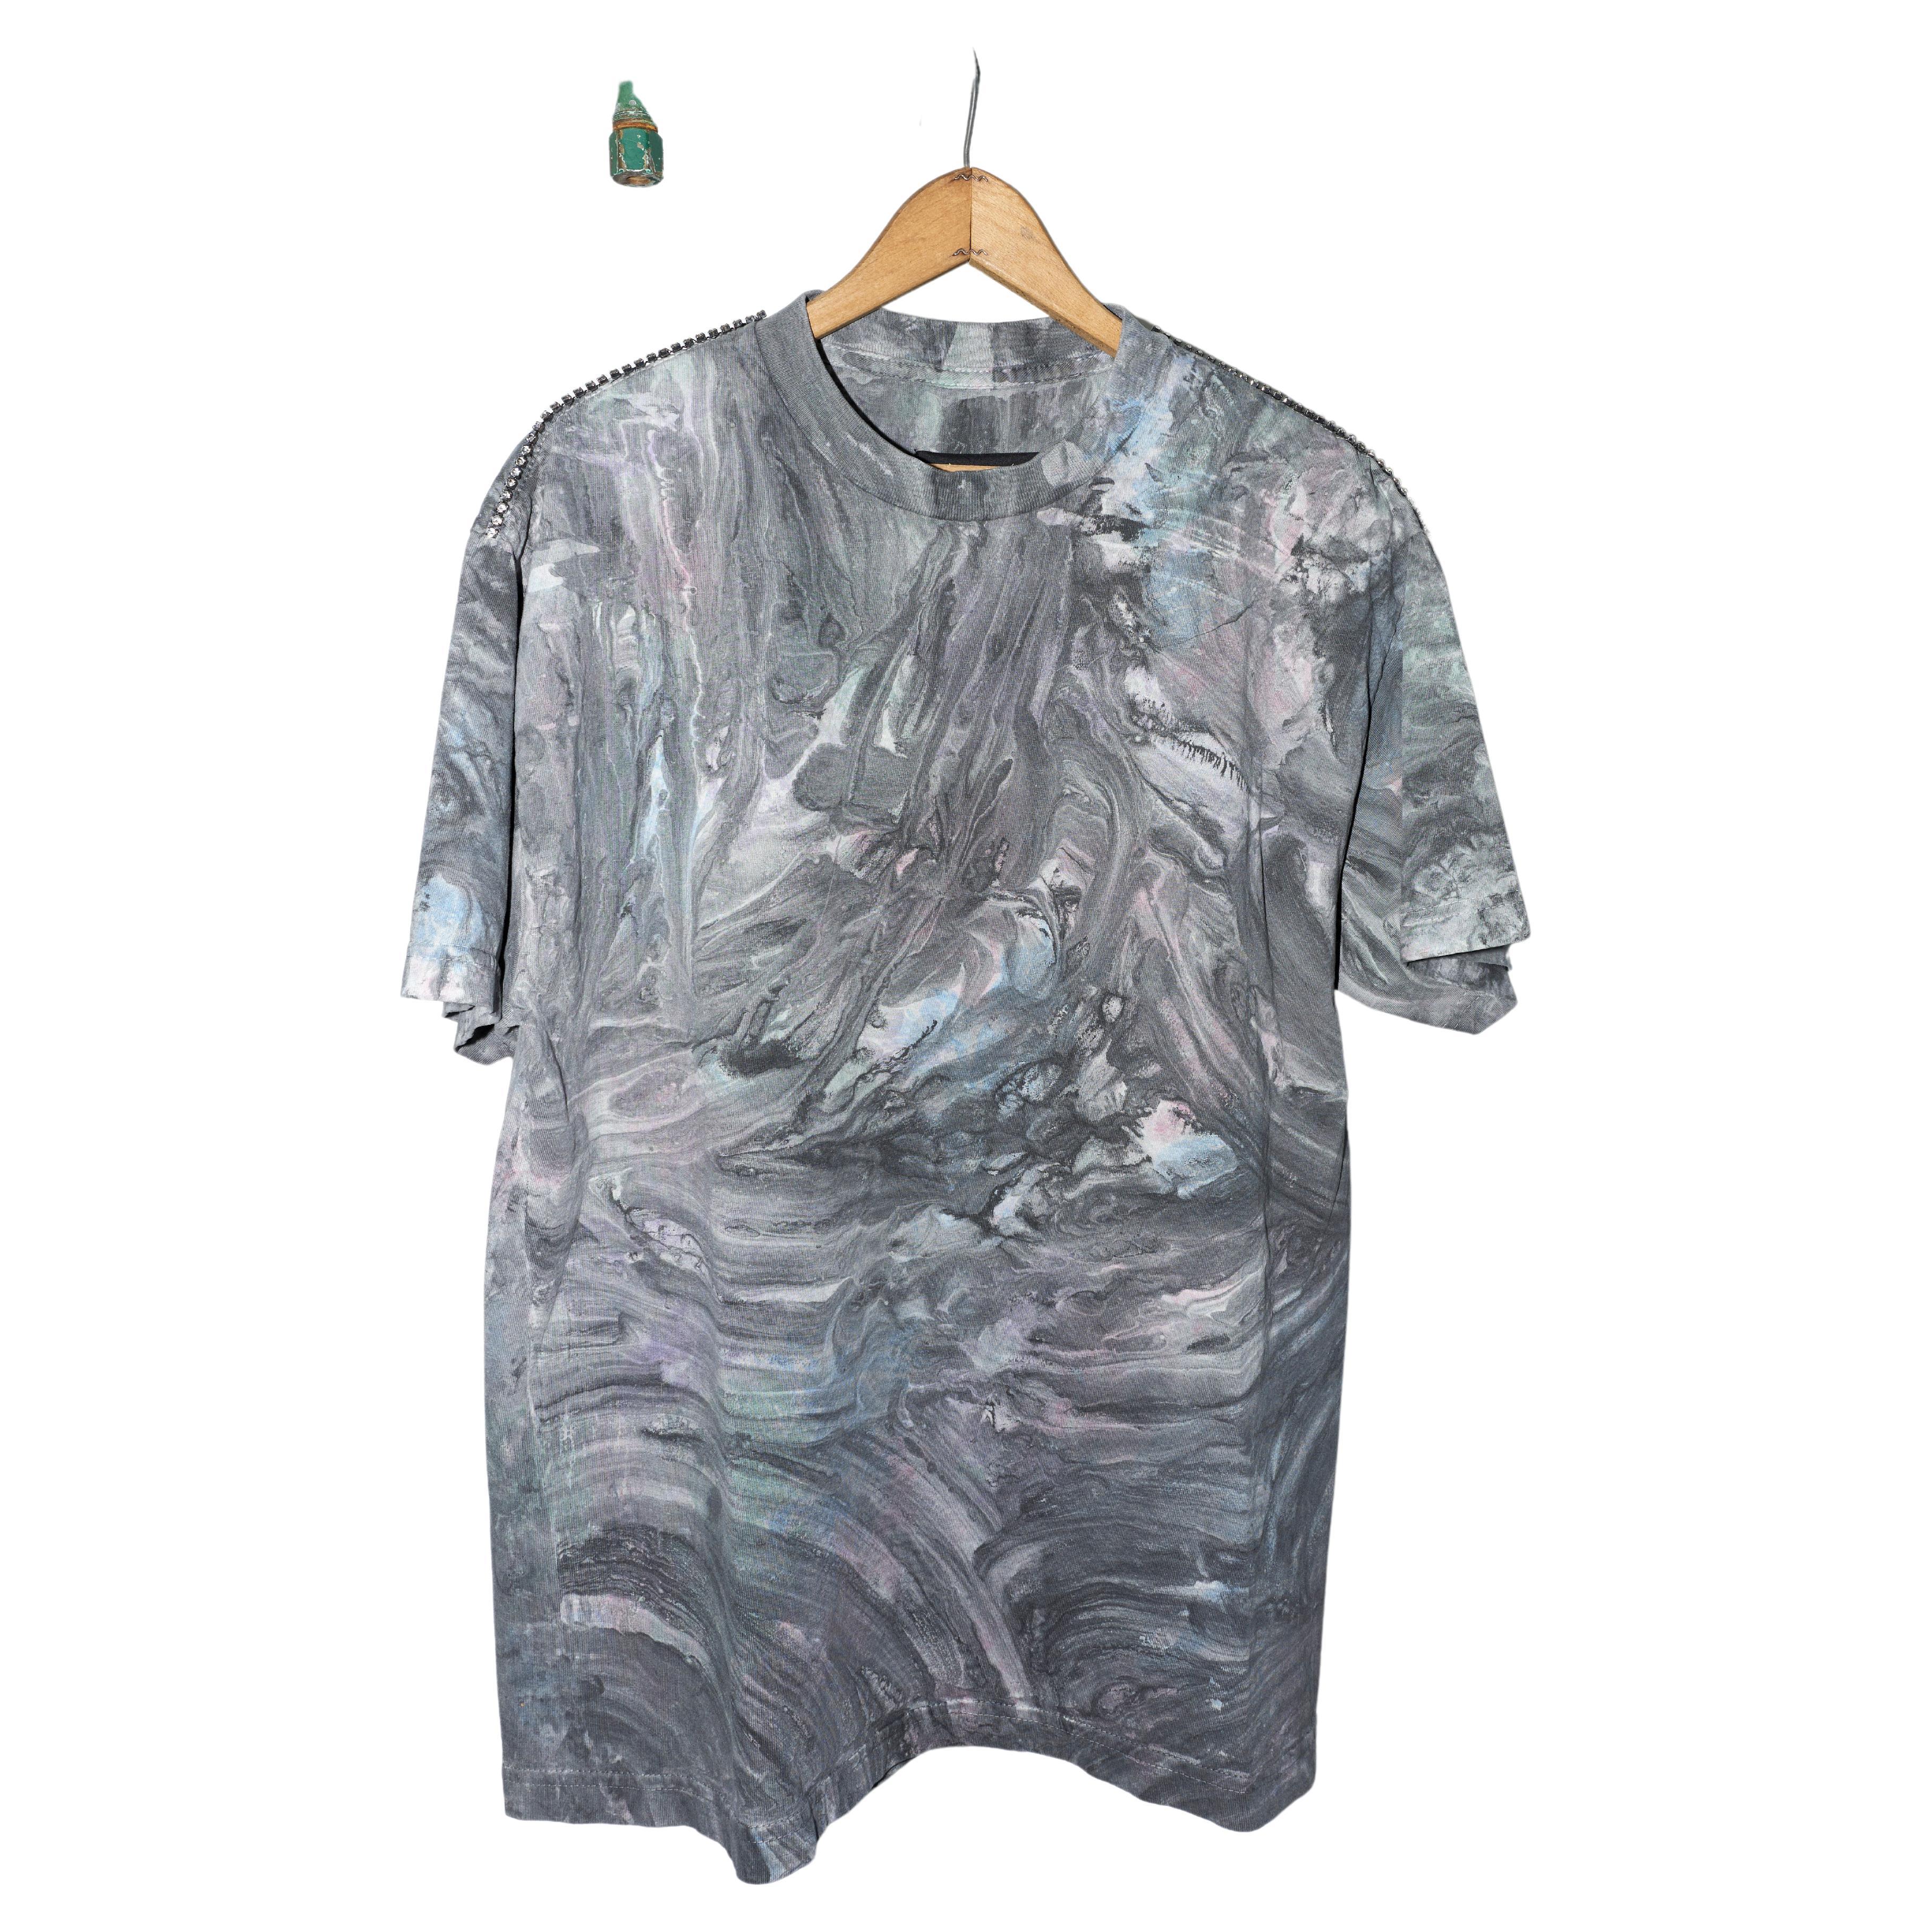 J Dauphin T-Shirt Grey Pastel Marble Dye Embellished  Crystal Cotton  

J Dauphin was created 2006 by Swedish French Johanna Dauphin. She started her career working for LVMH owned Fend at the Italian head office in Rome. She later moved to Paris and